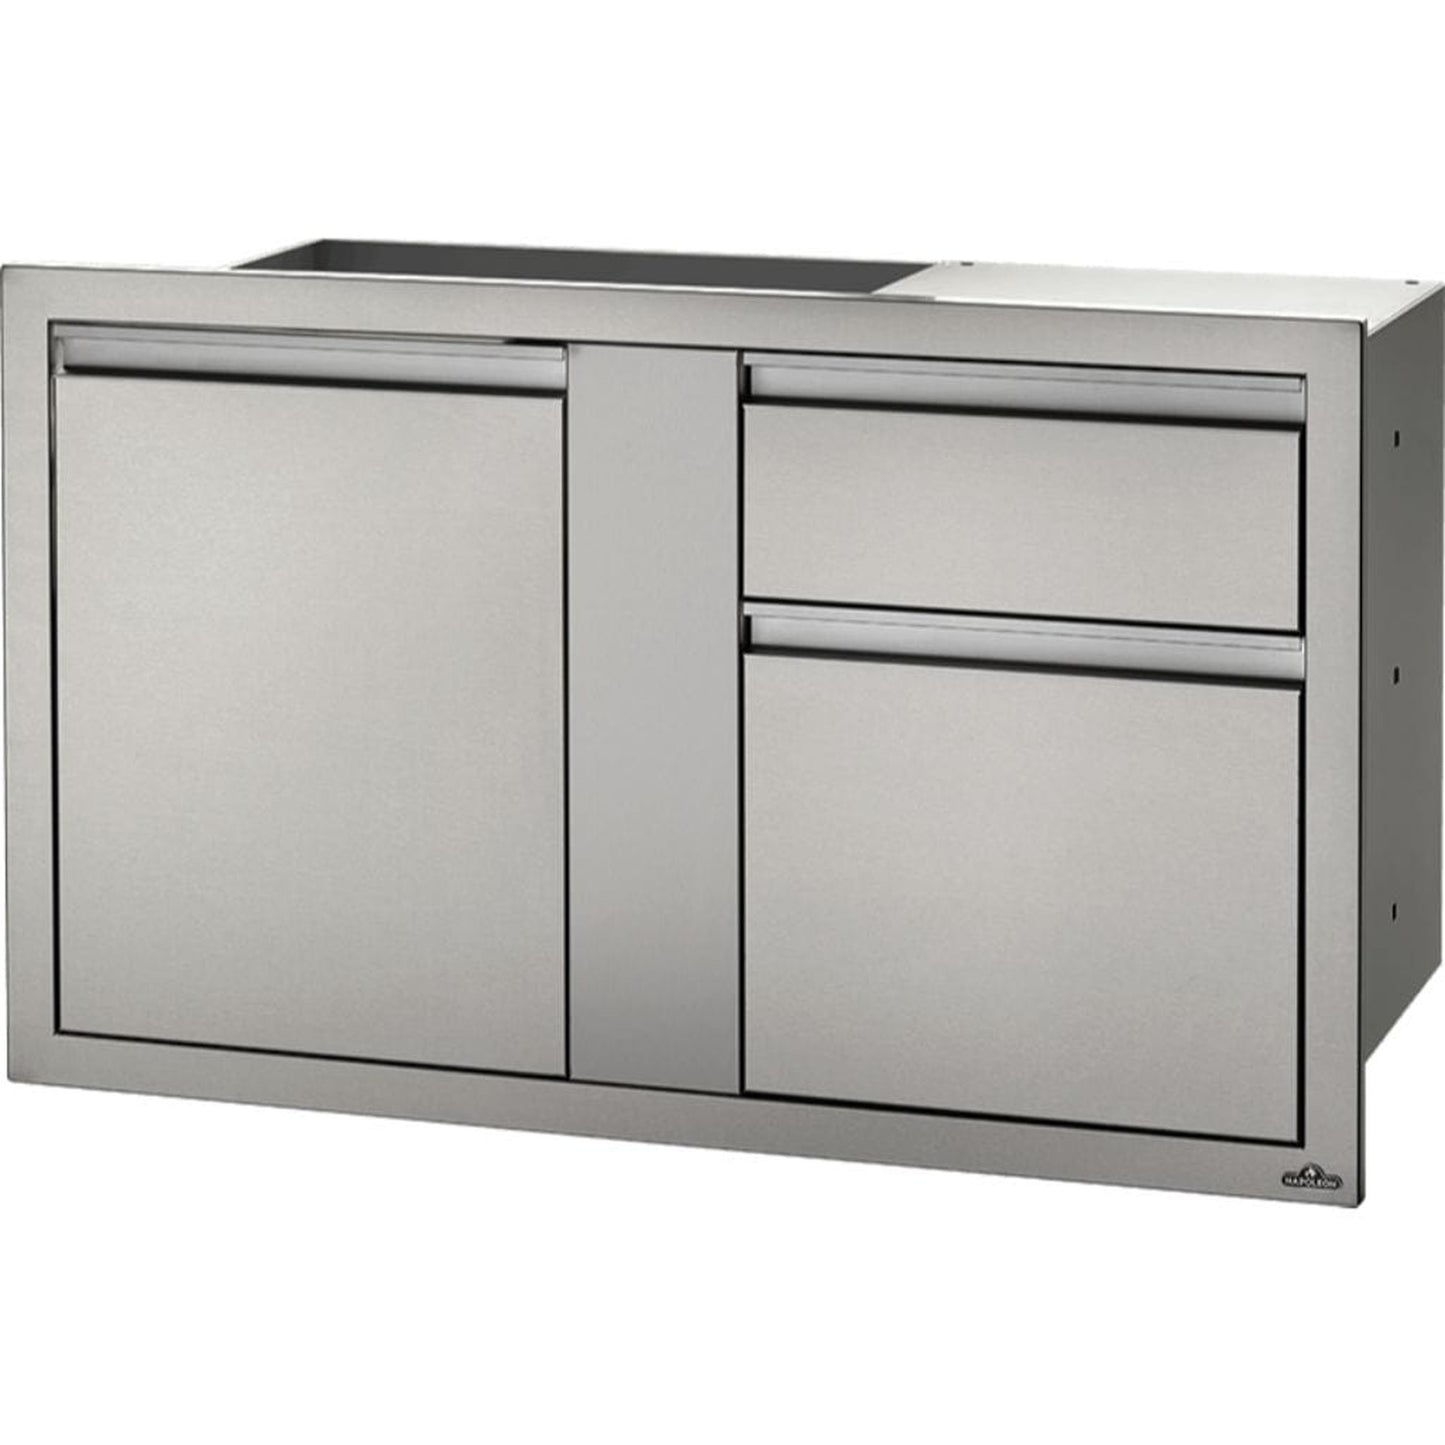 Napoleon 36"/42" Stainless Steel Large Single Door and Waste Bin Drawer